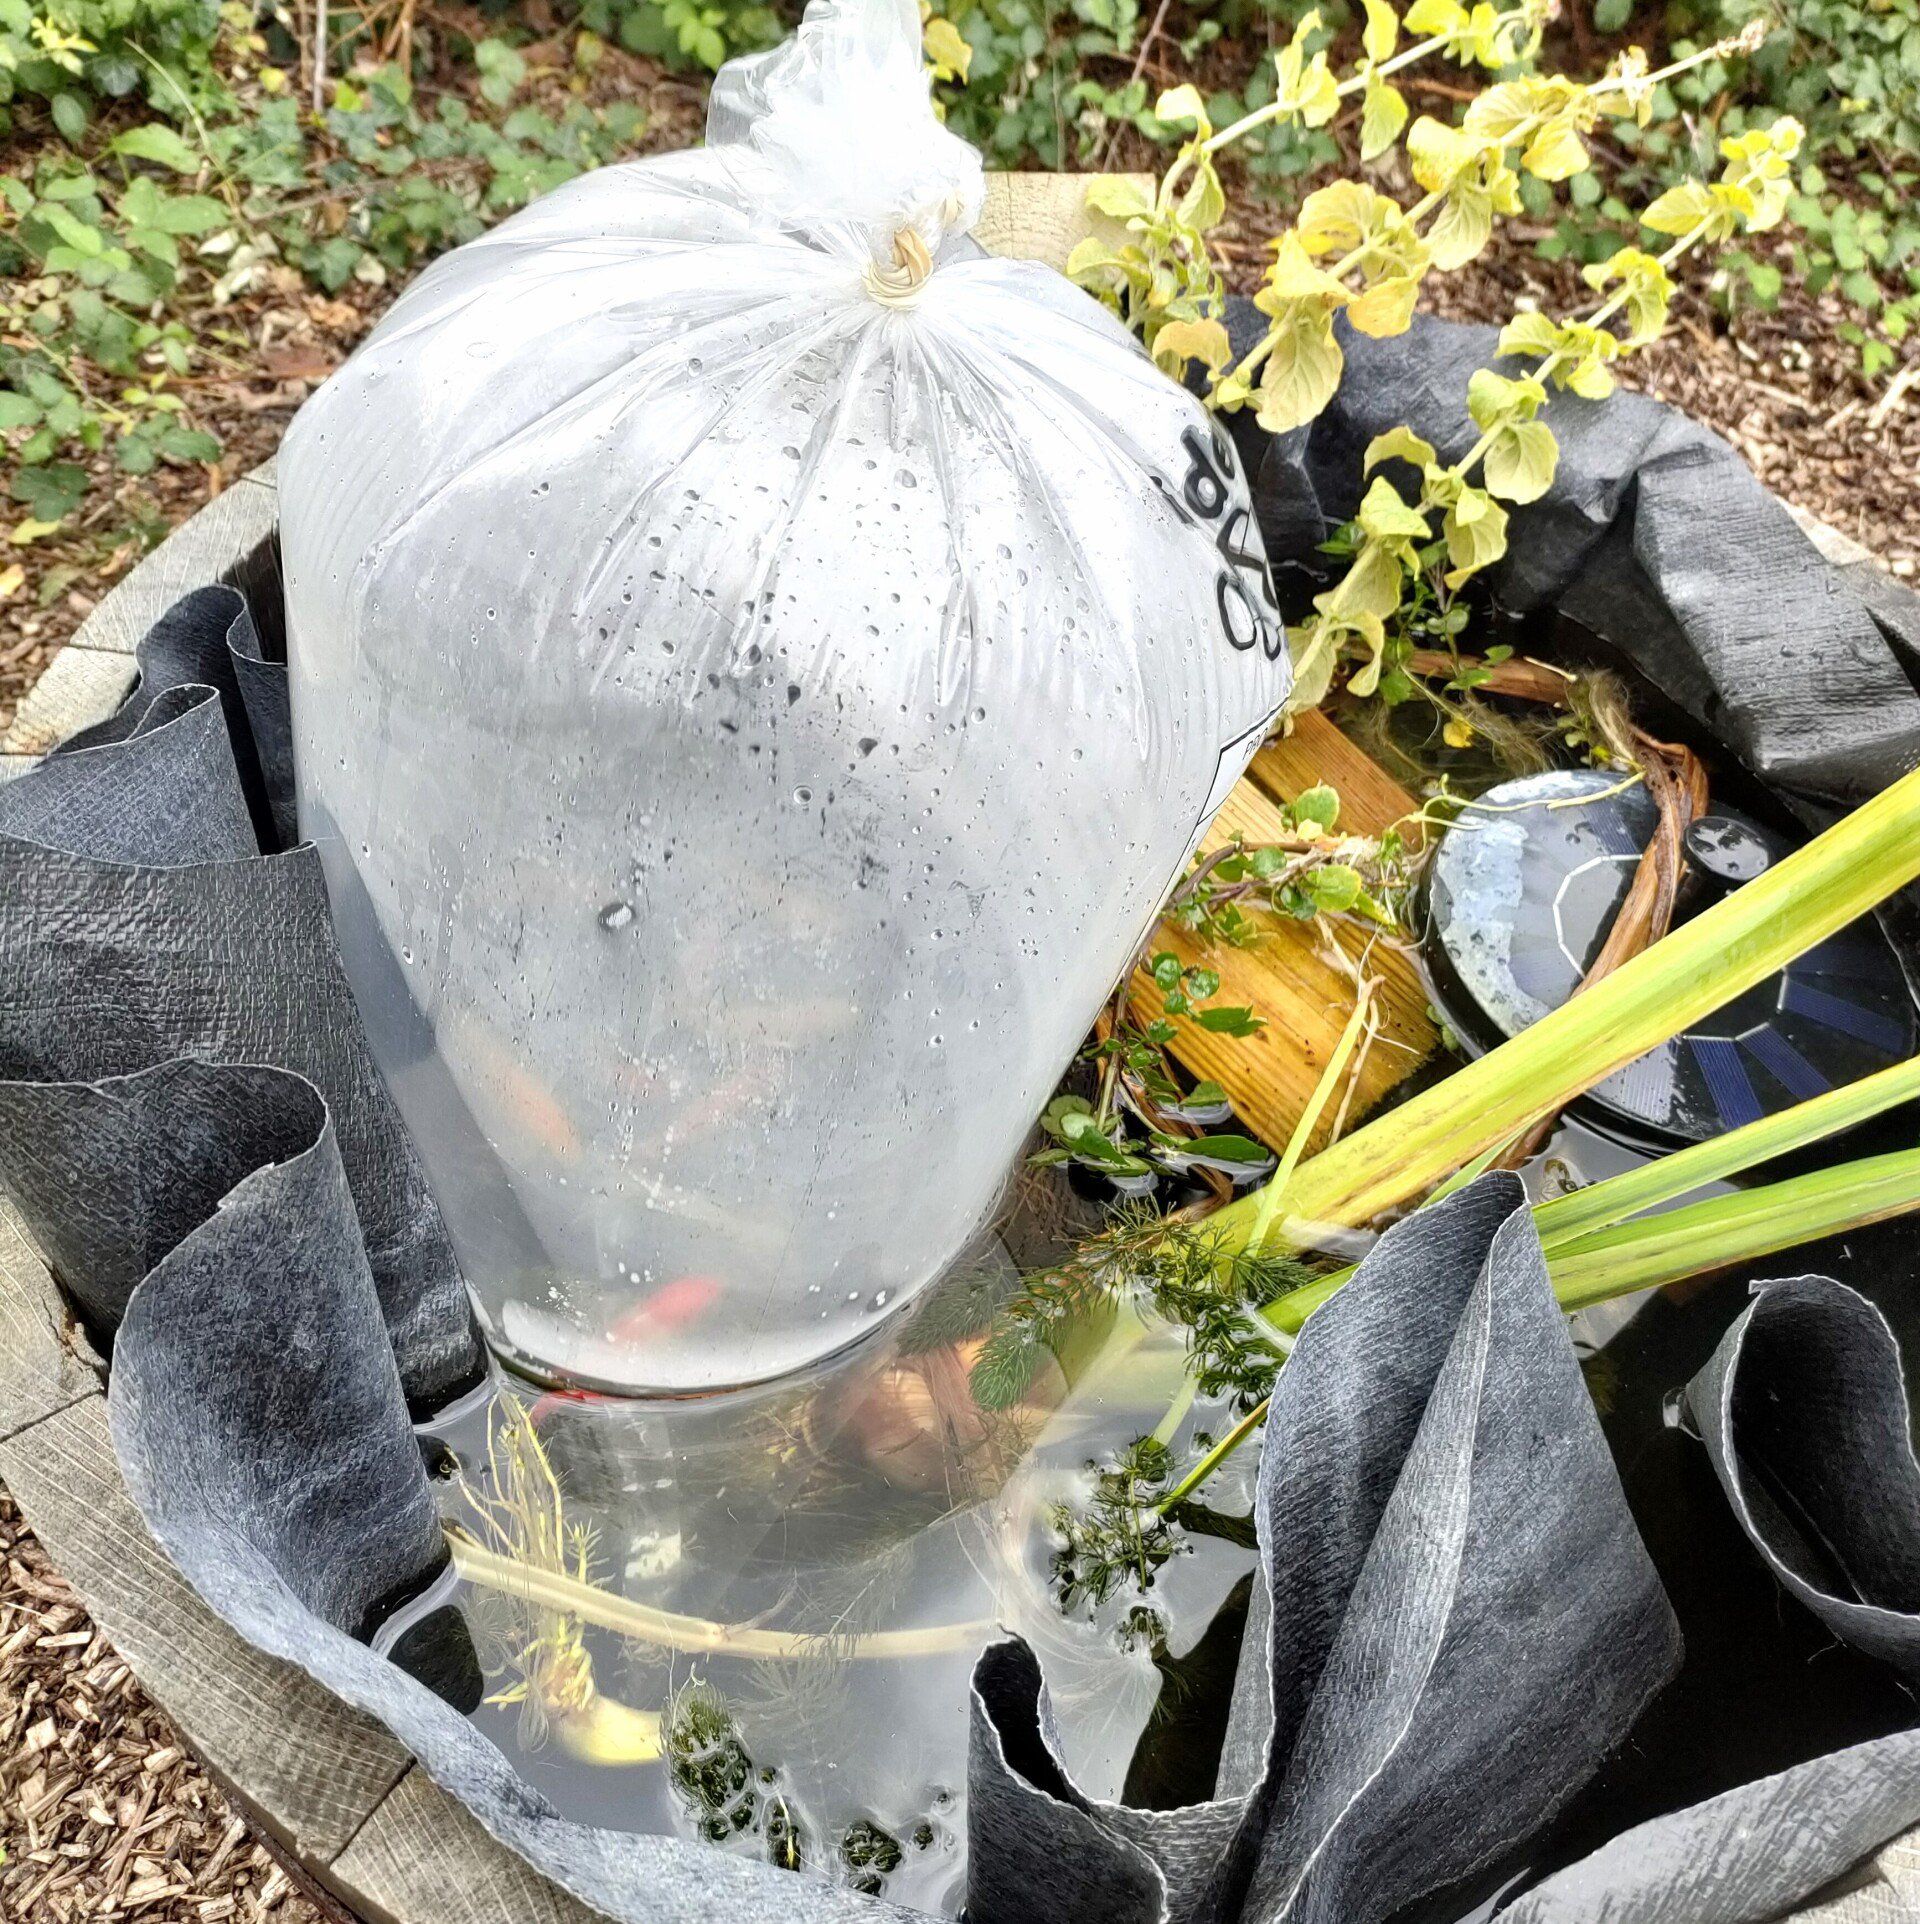 Cut wodden barrel with black membrane filled with water, pond plants and a separate plastic bag containing some goldfish